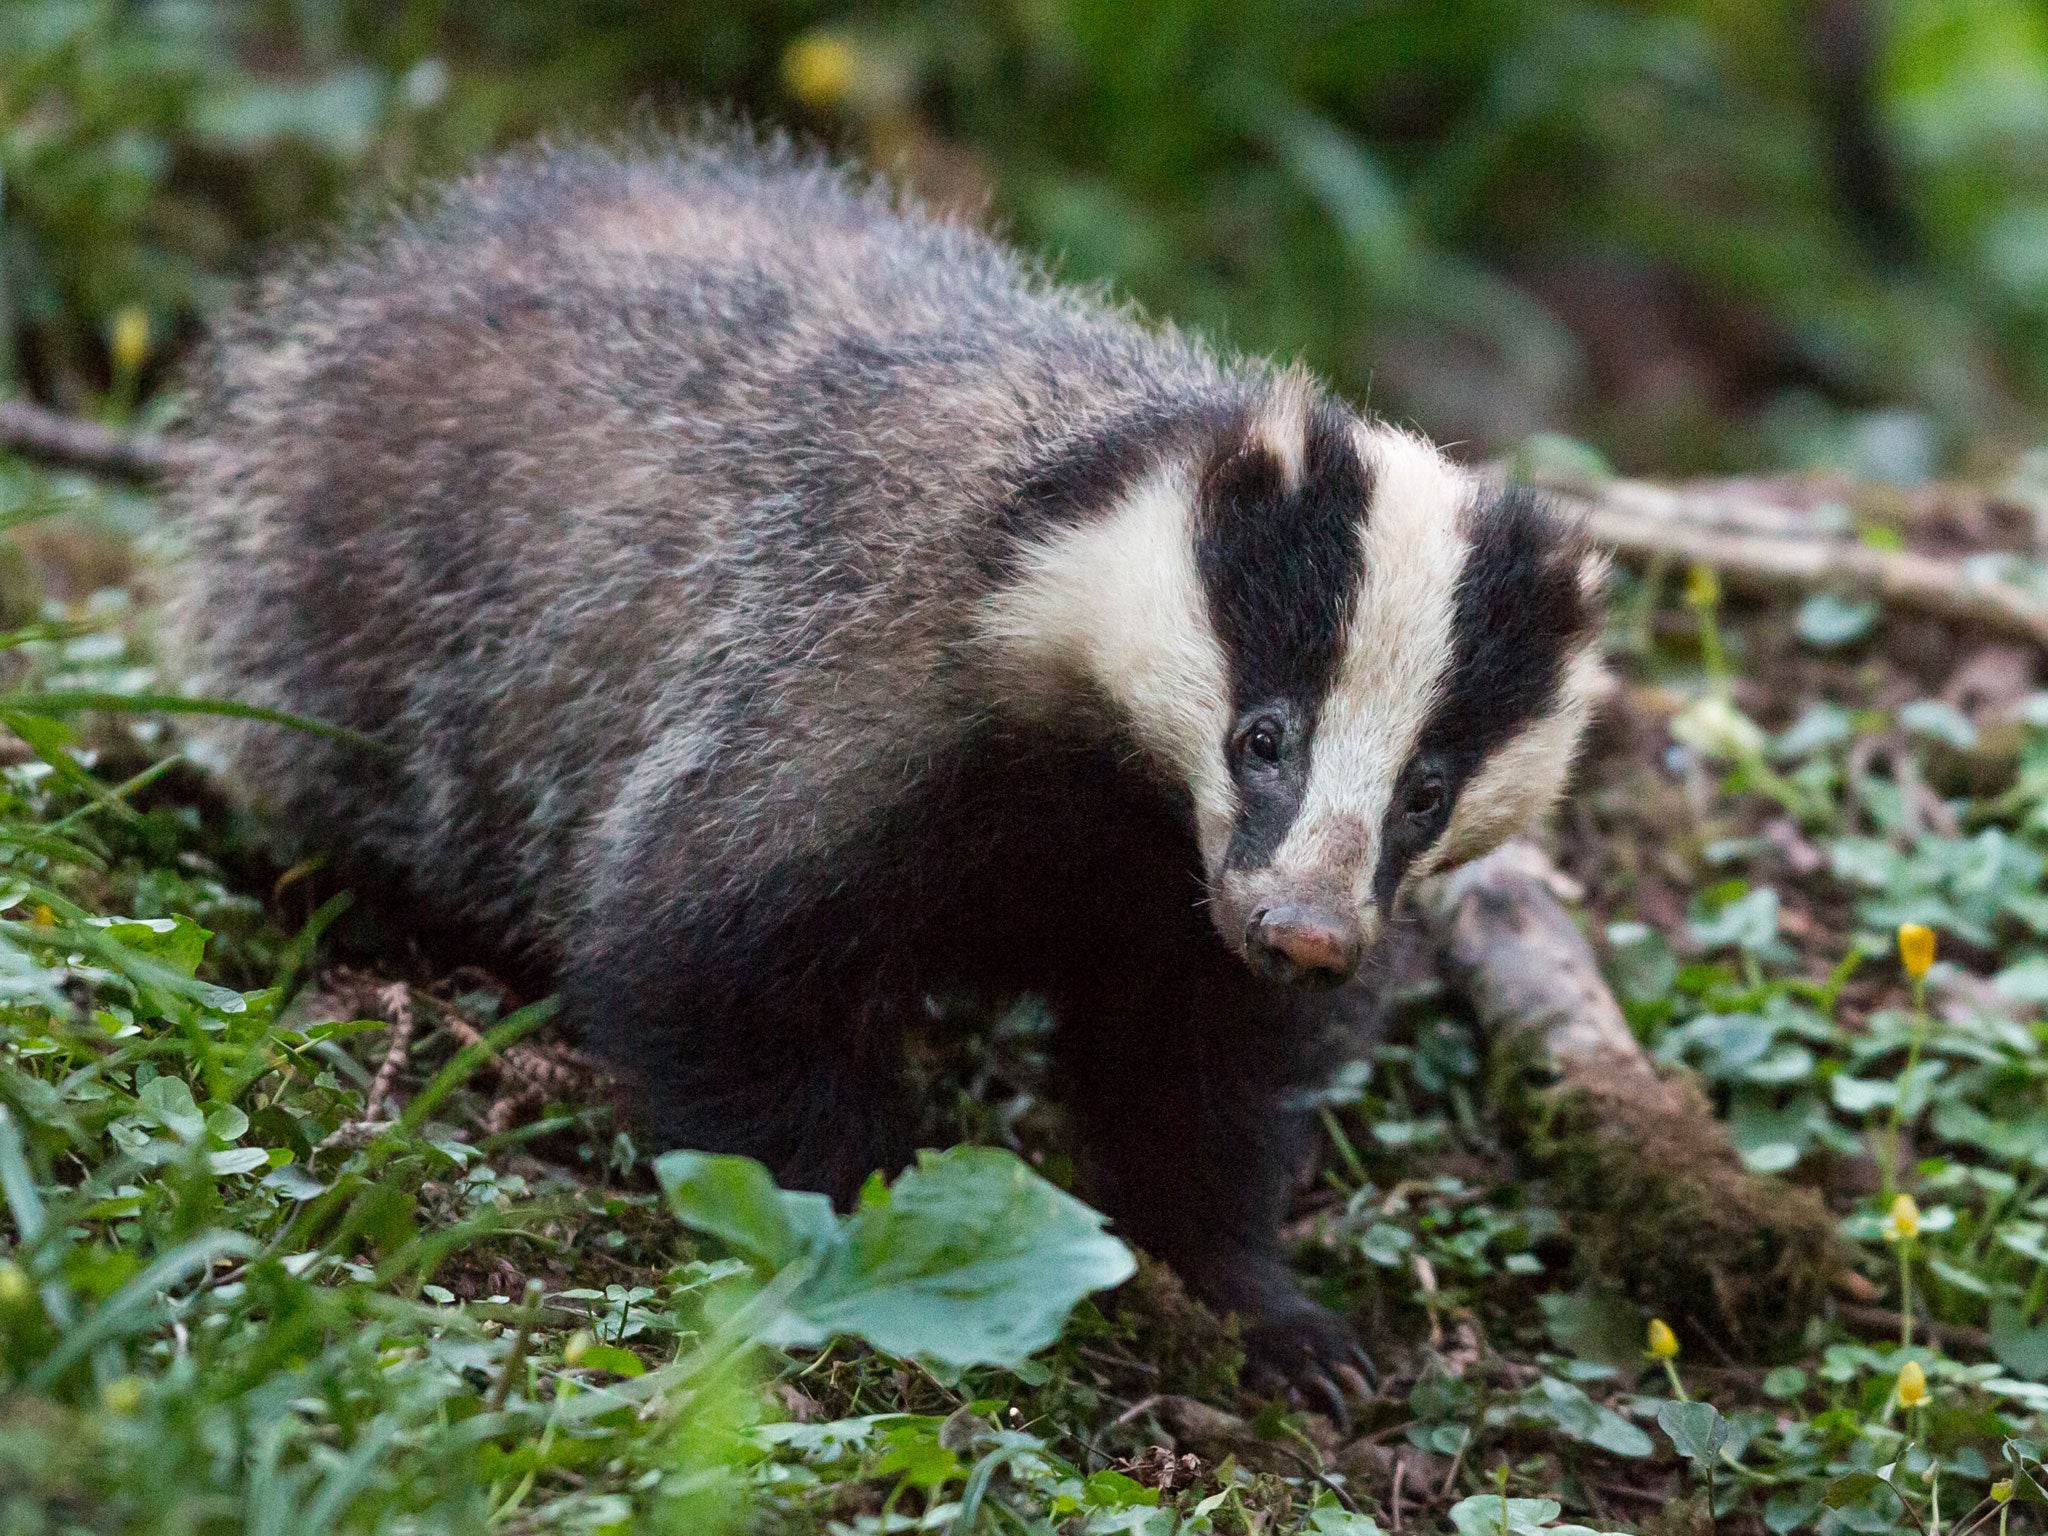 The review of the Avon and Somerset Constabulary's handling of the trial badger cull last Autumn centred on four incidents